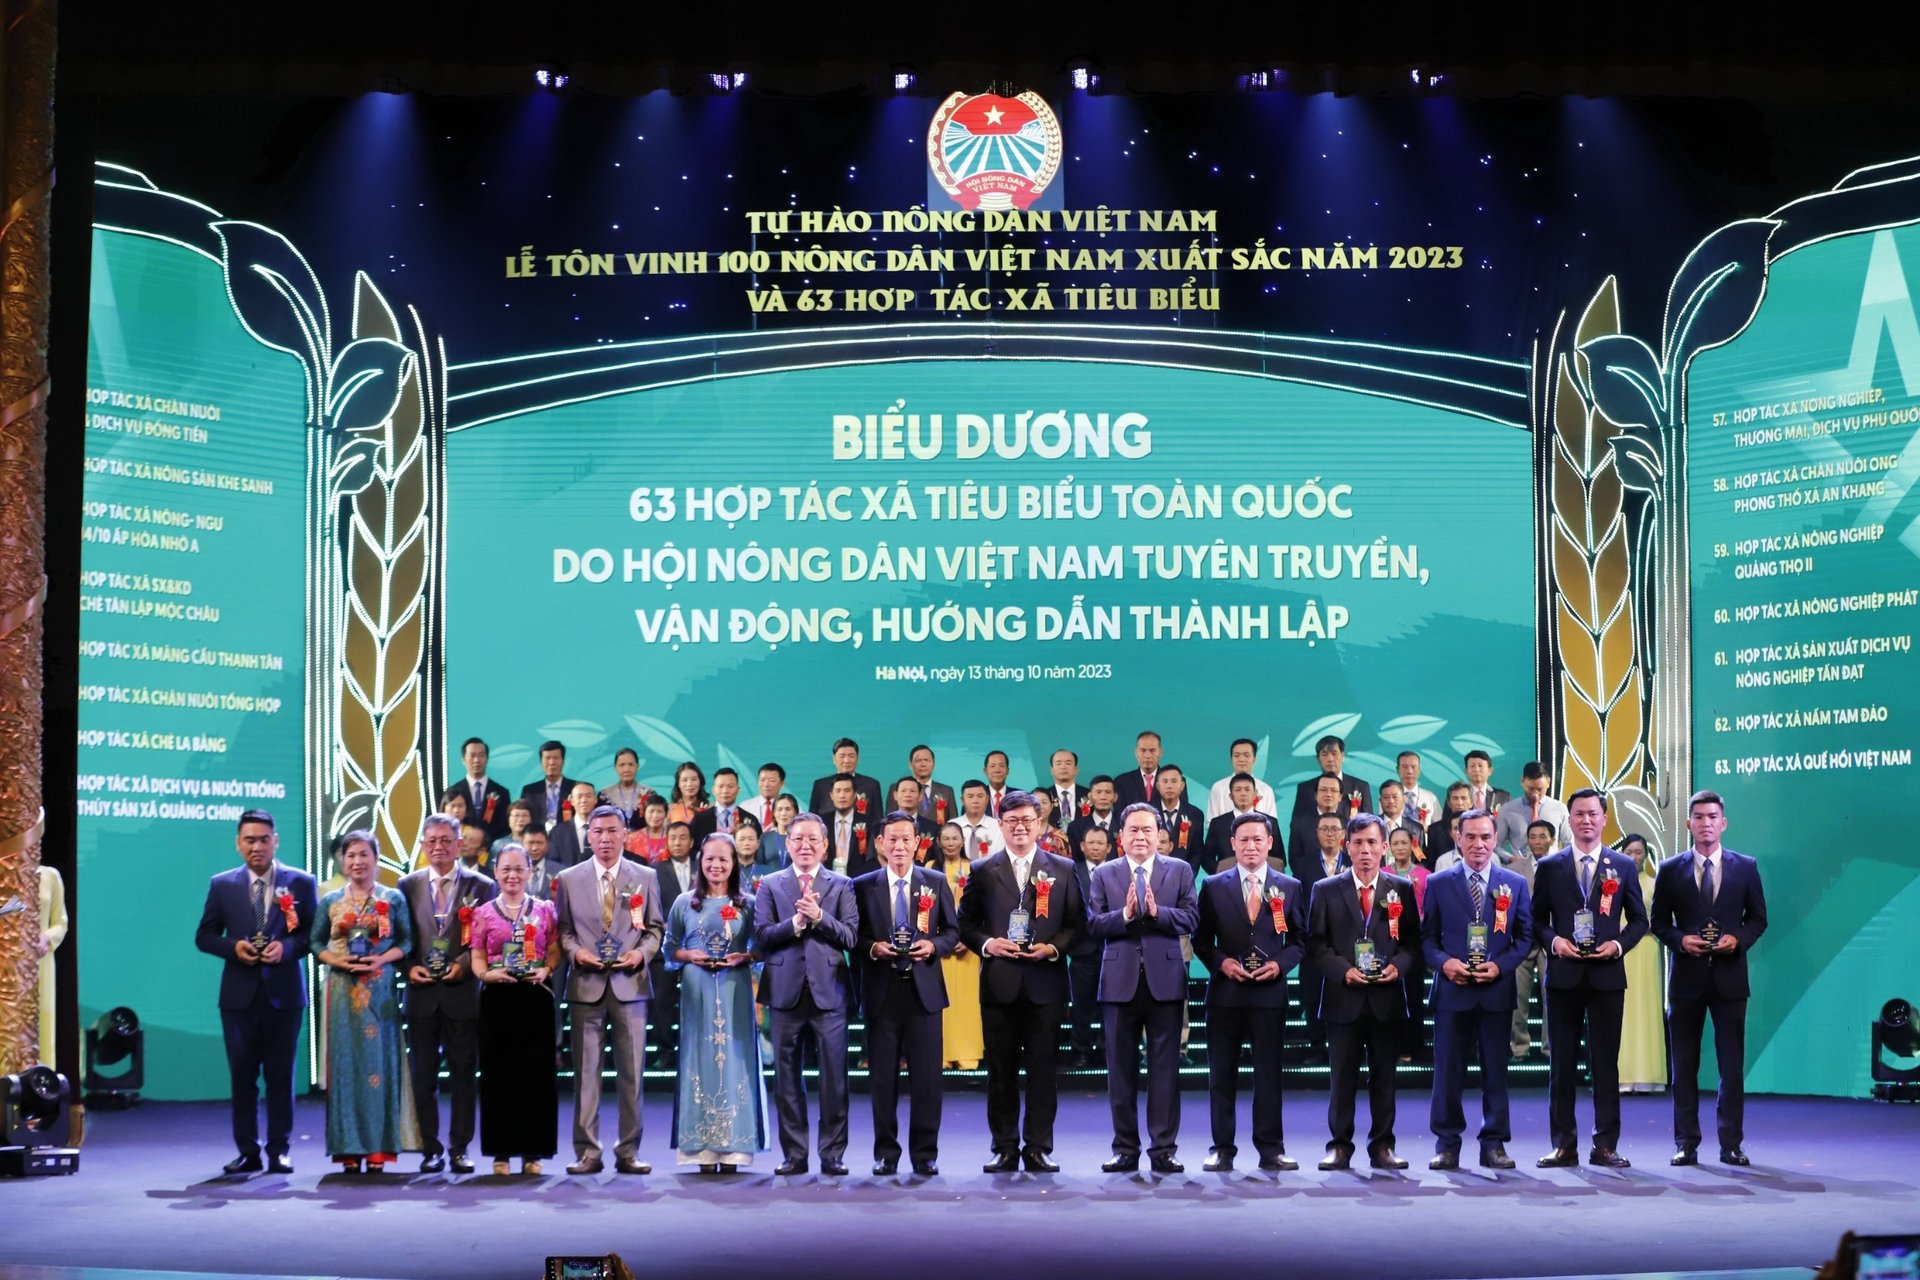 63 typical cooperatives mobilized and established by Viet Nam Farmer's Union at all levels were honored on the evening of October 13.